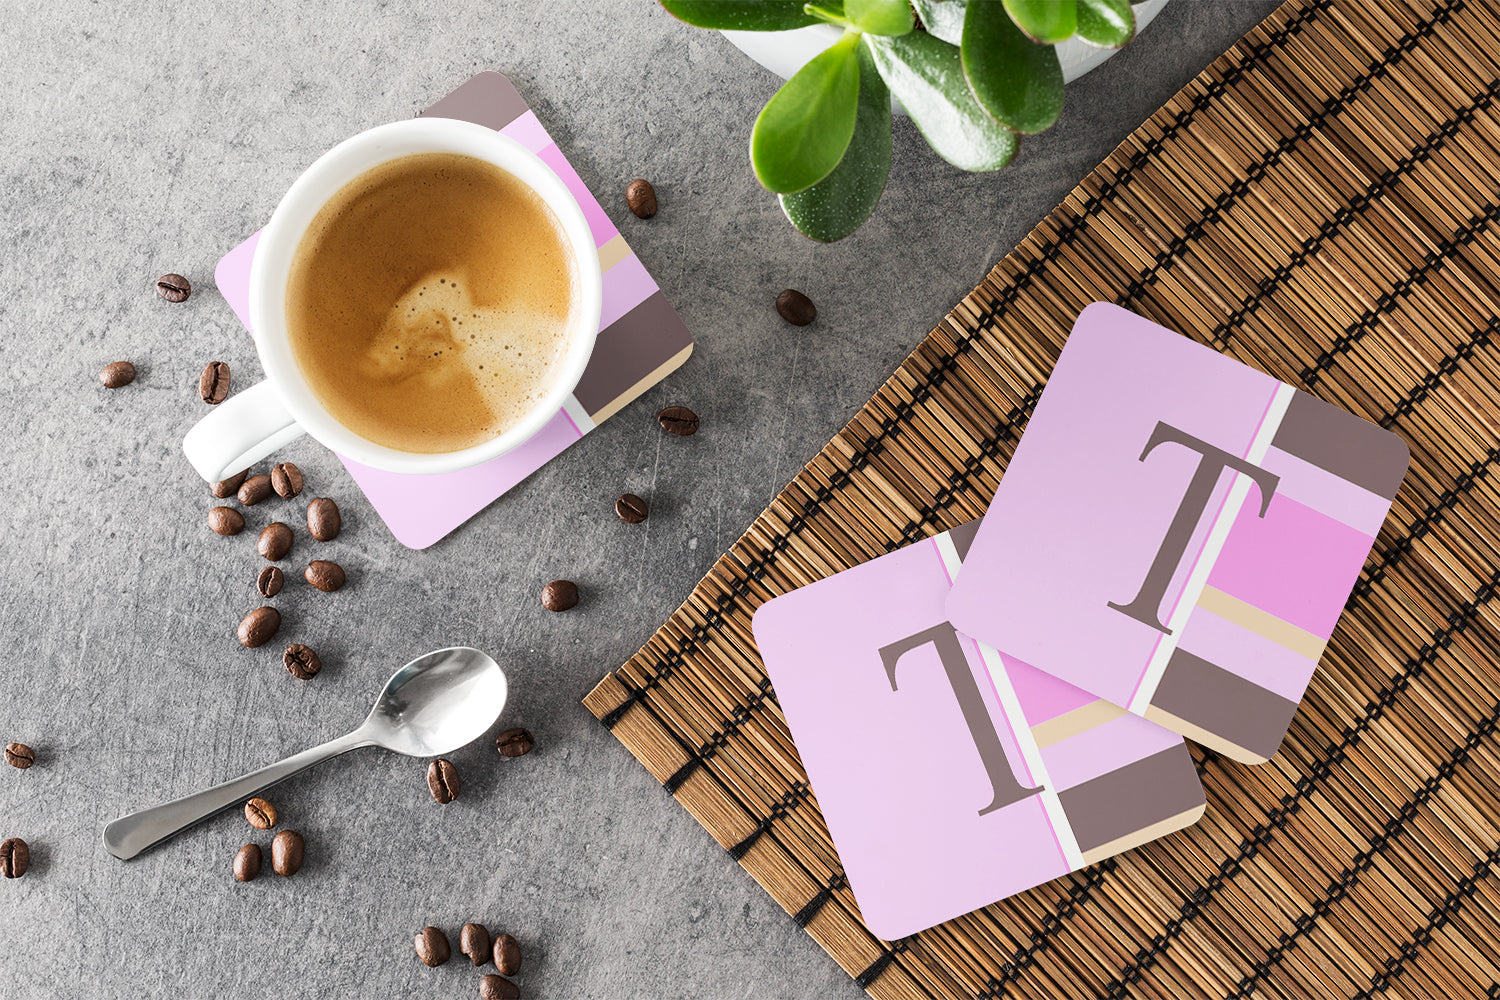 Set of 4 Monogram - Pink Stripes Foam Coasters Initial Letter T - the-store.com